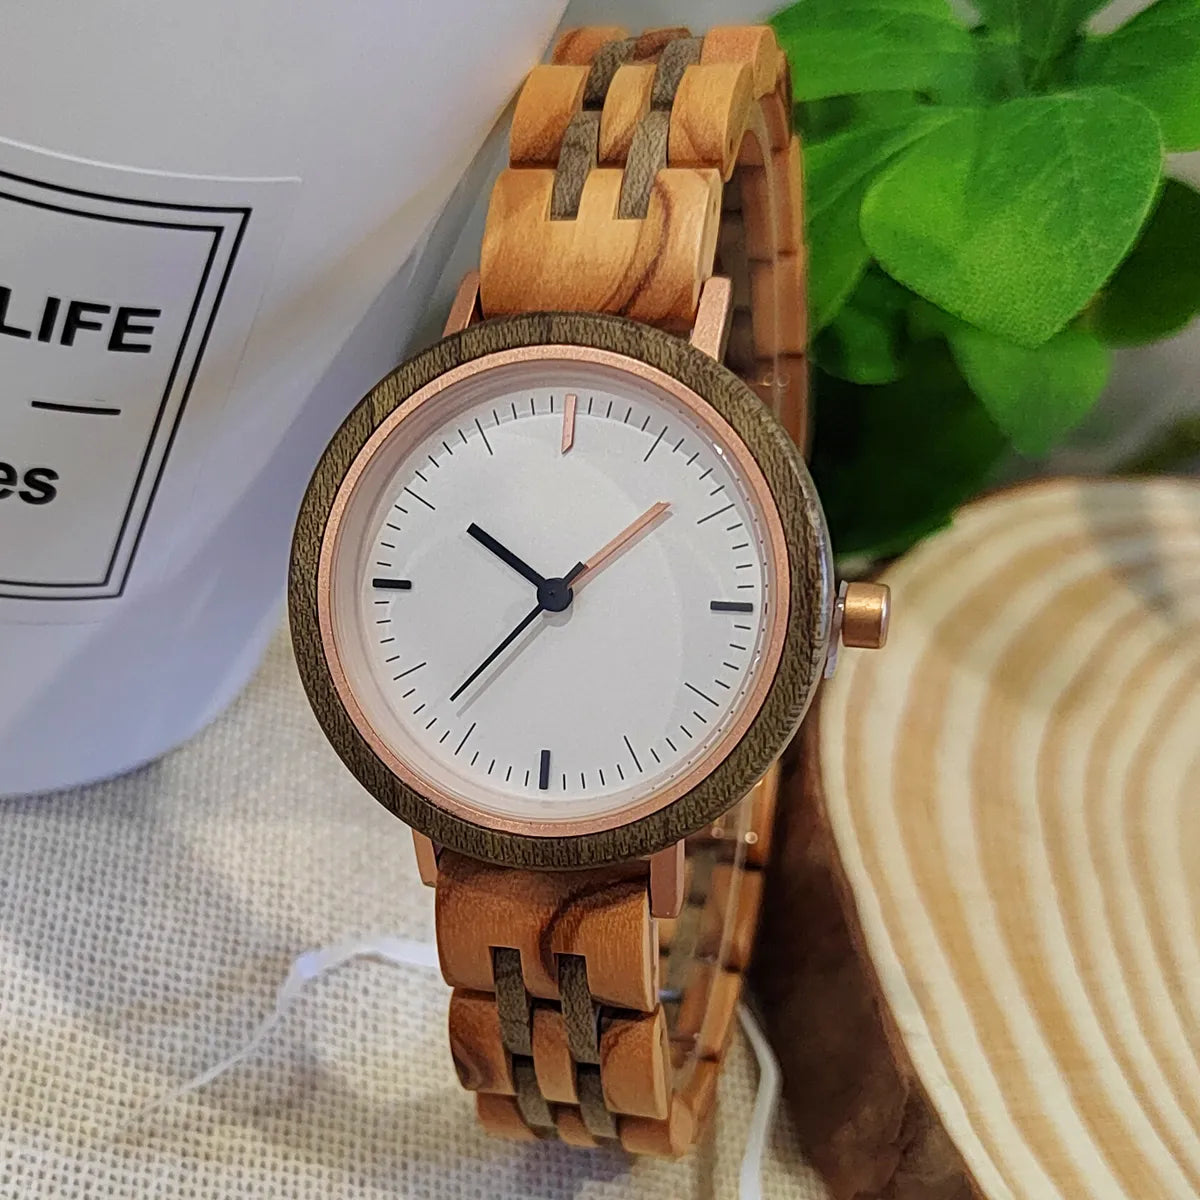 Compact and Exquisite Retro Lady Wood Wrist Watch For Women Wife Girlfriend Clock Waterproof Quartz Wooden Watches for Ladies